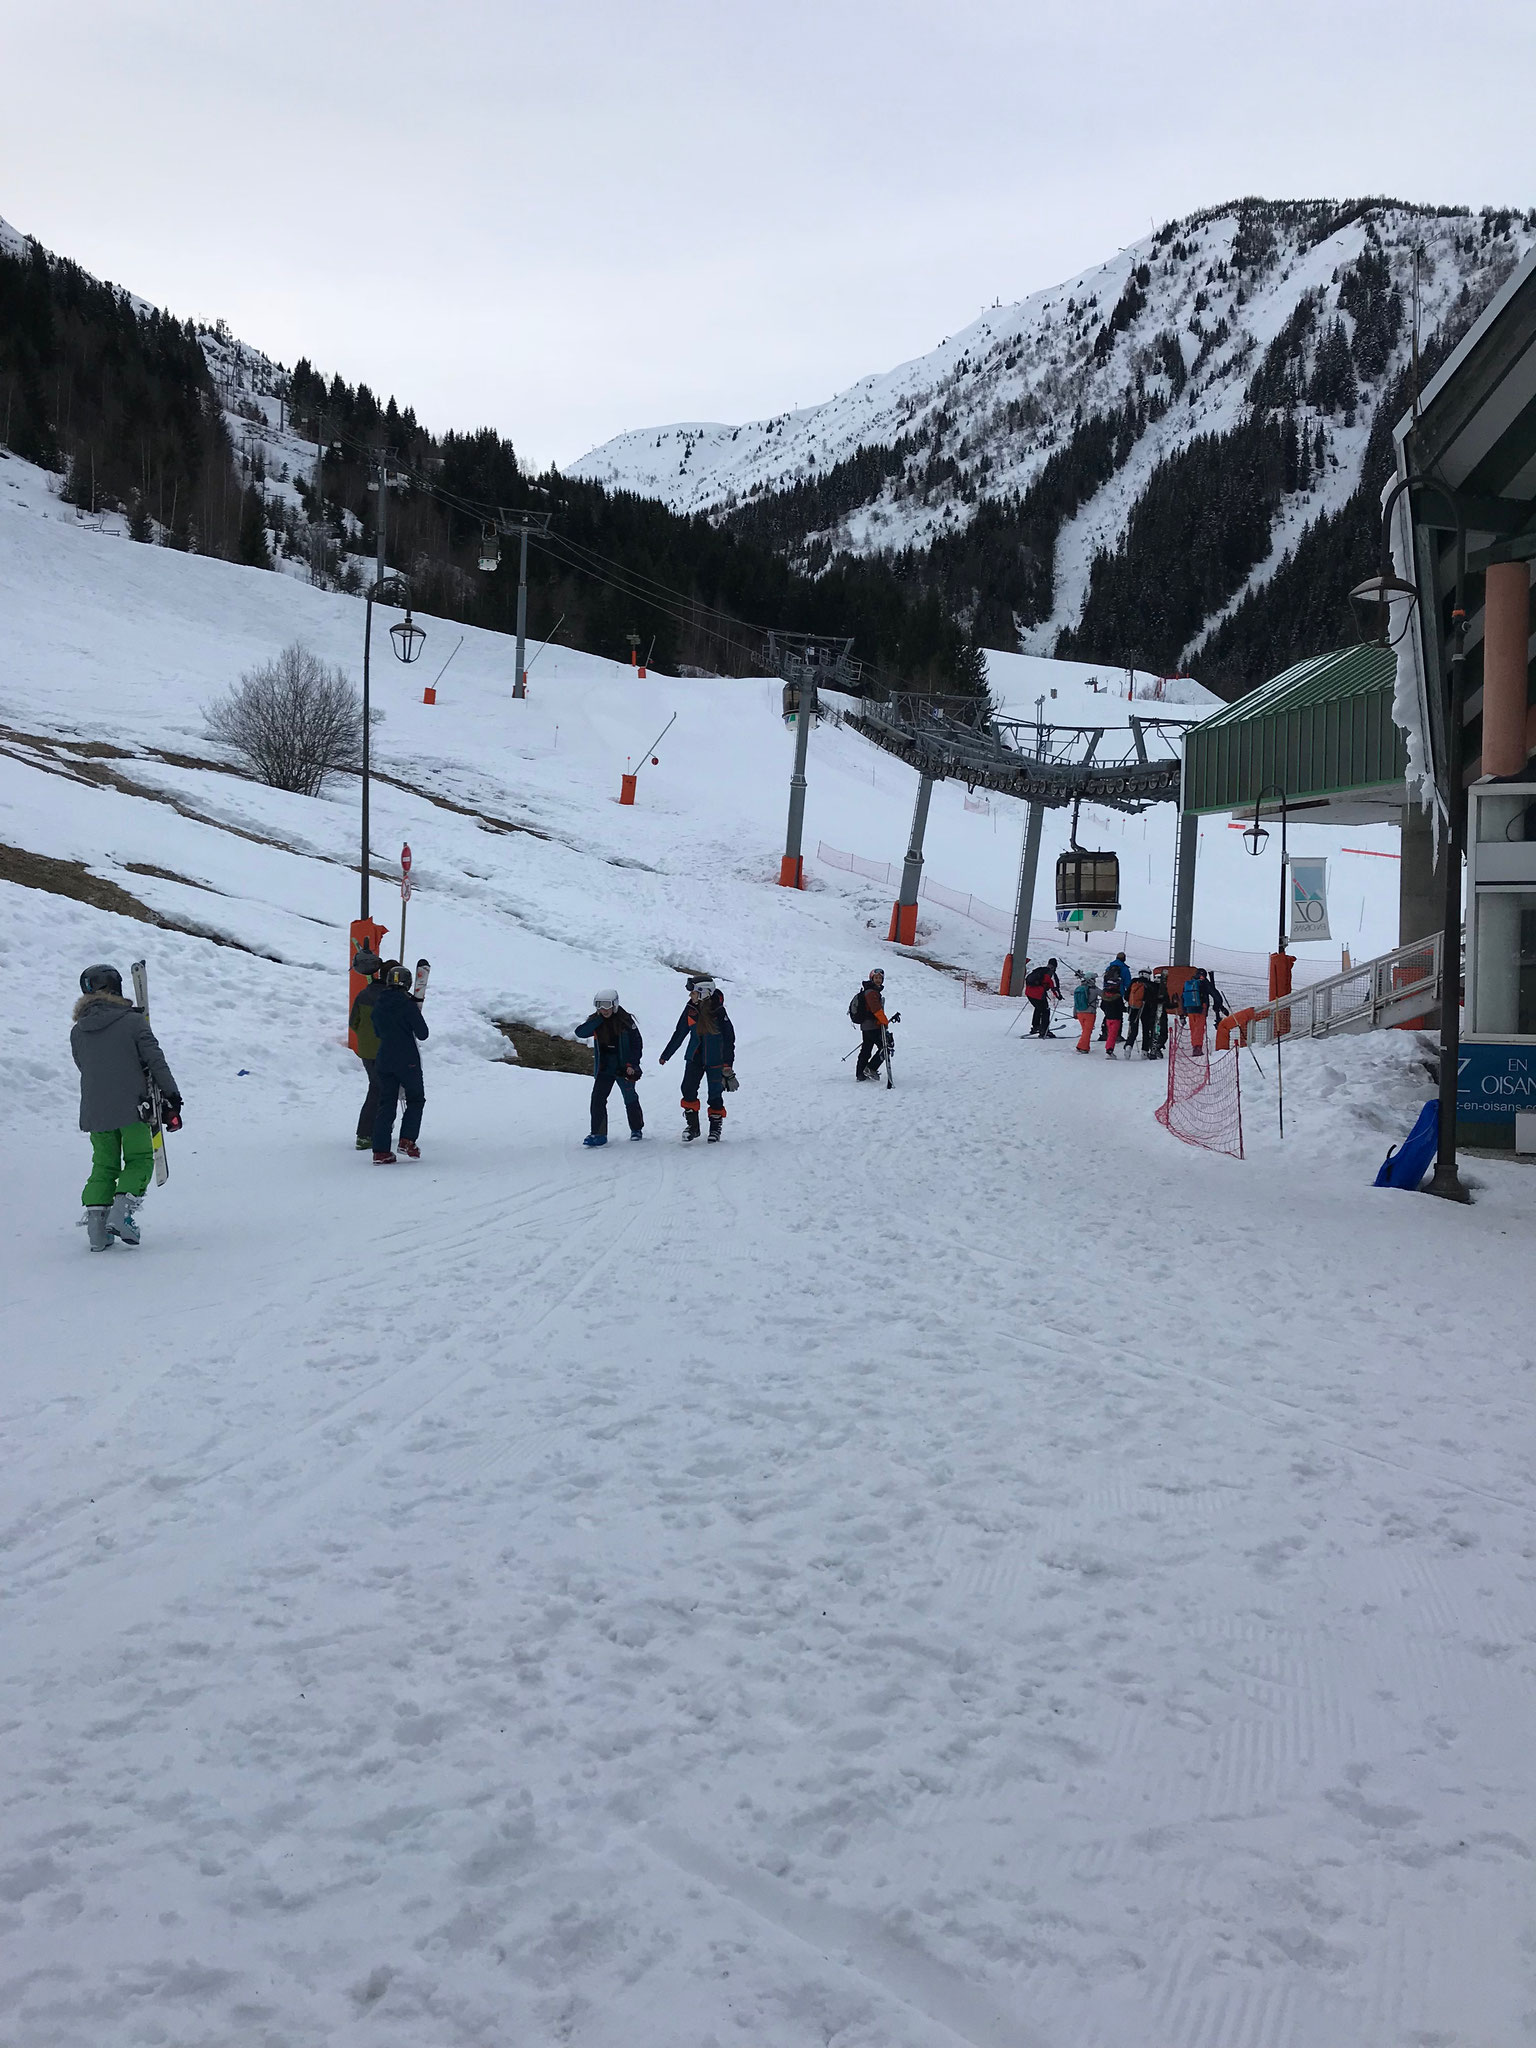 Poutran lift and practice slopes